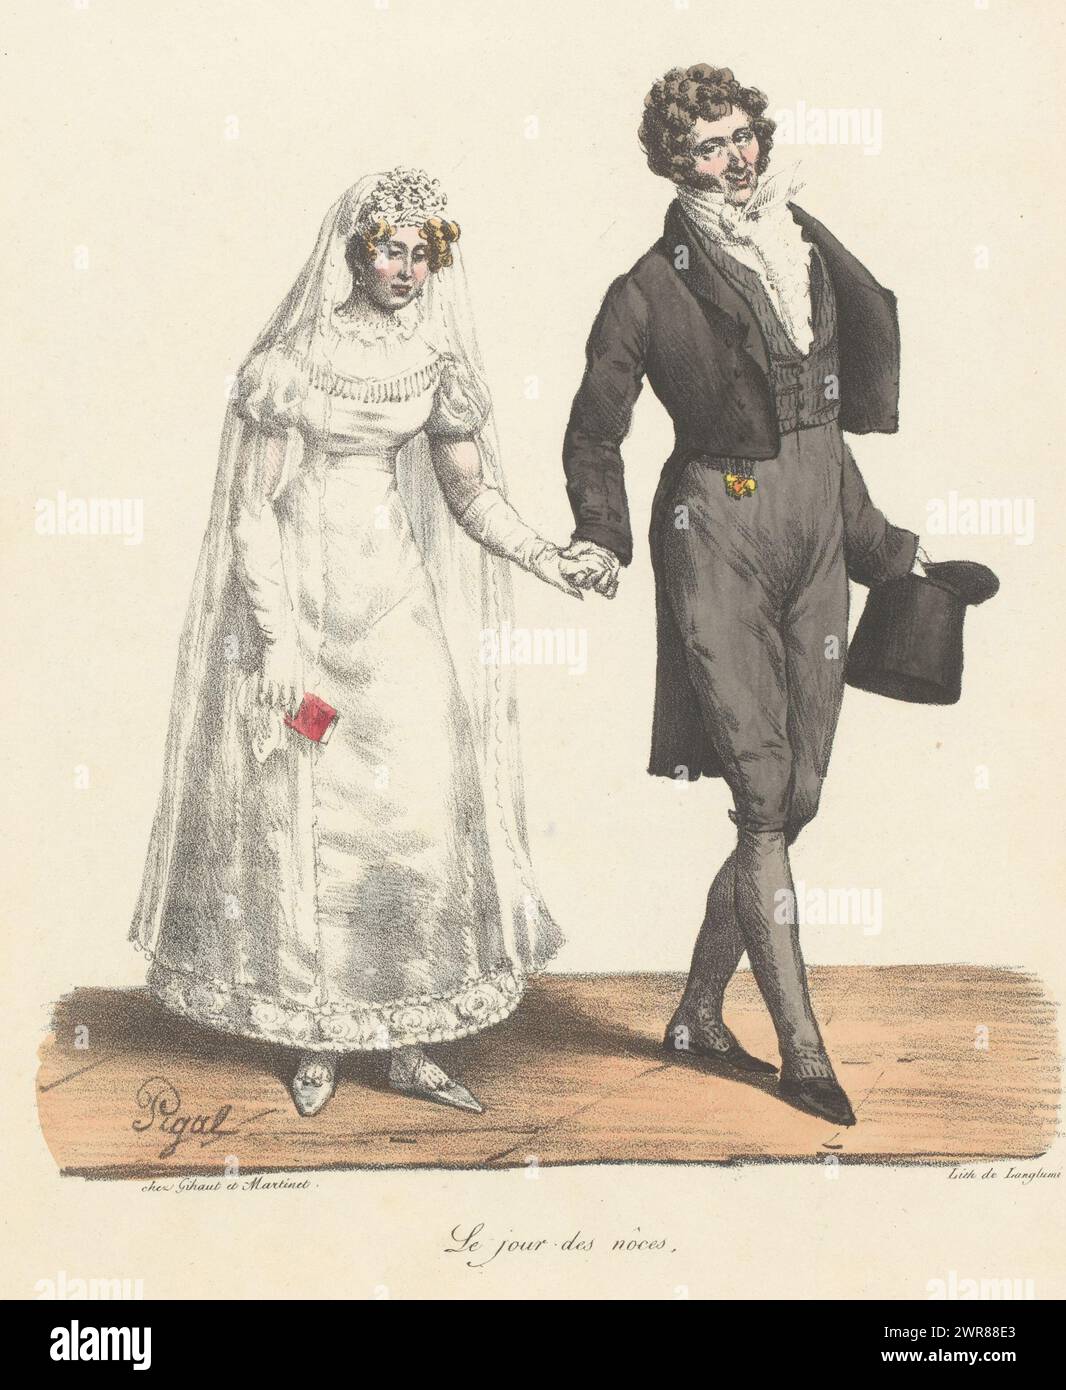 Couple in wedding clothes, Le jour des nôces (title on object), Incidents from society (series title), Scènes de société (series title on object), print maker: Edme Jean Pigal, printer: Pierre Langlumé, publisher: Gihaut et Martinet, Paris, 1823, paper, height 334 mm × width 242 mm, print Stock Photo